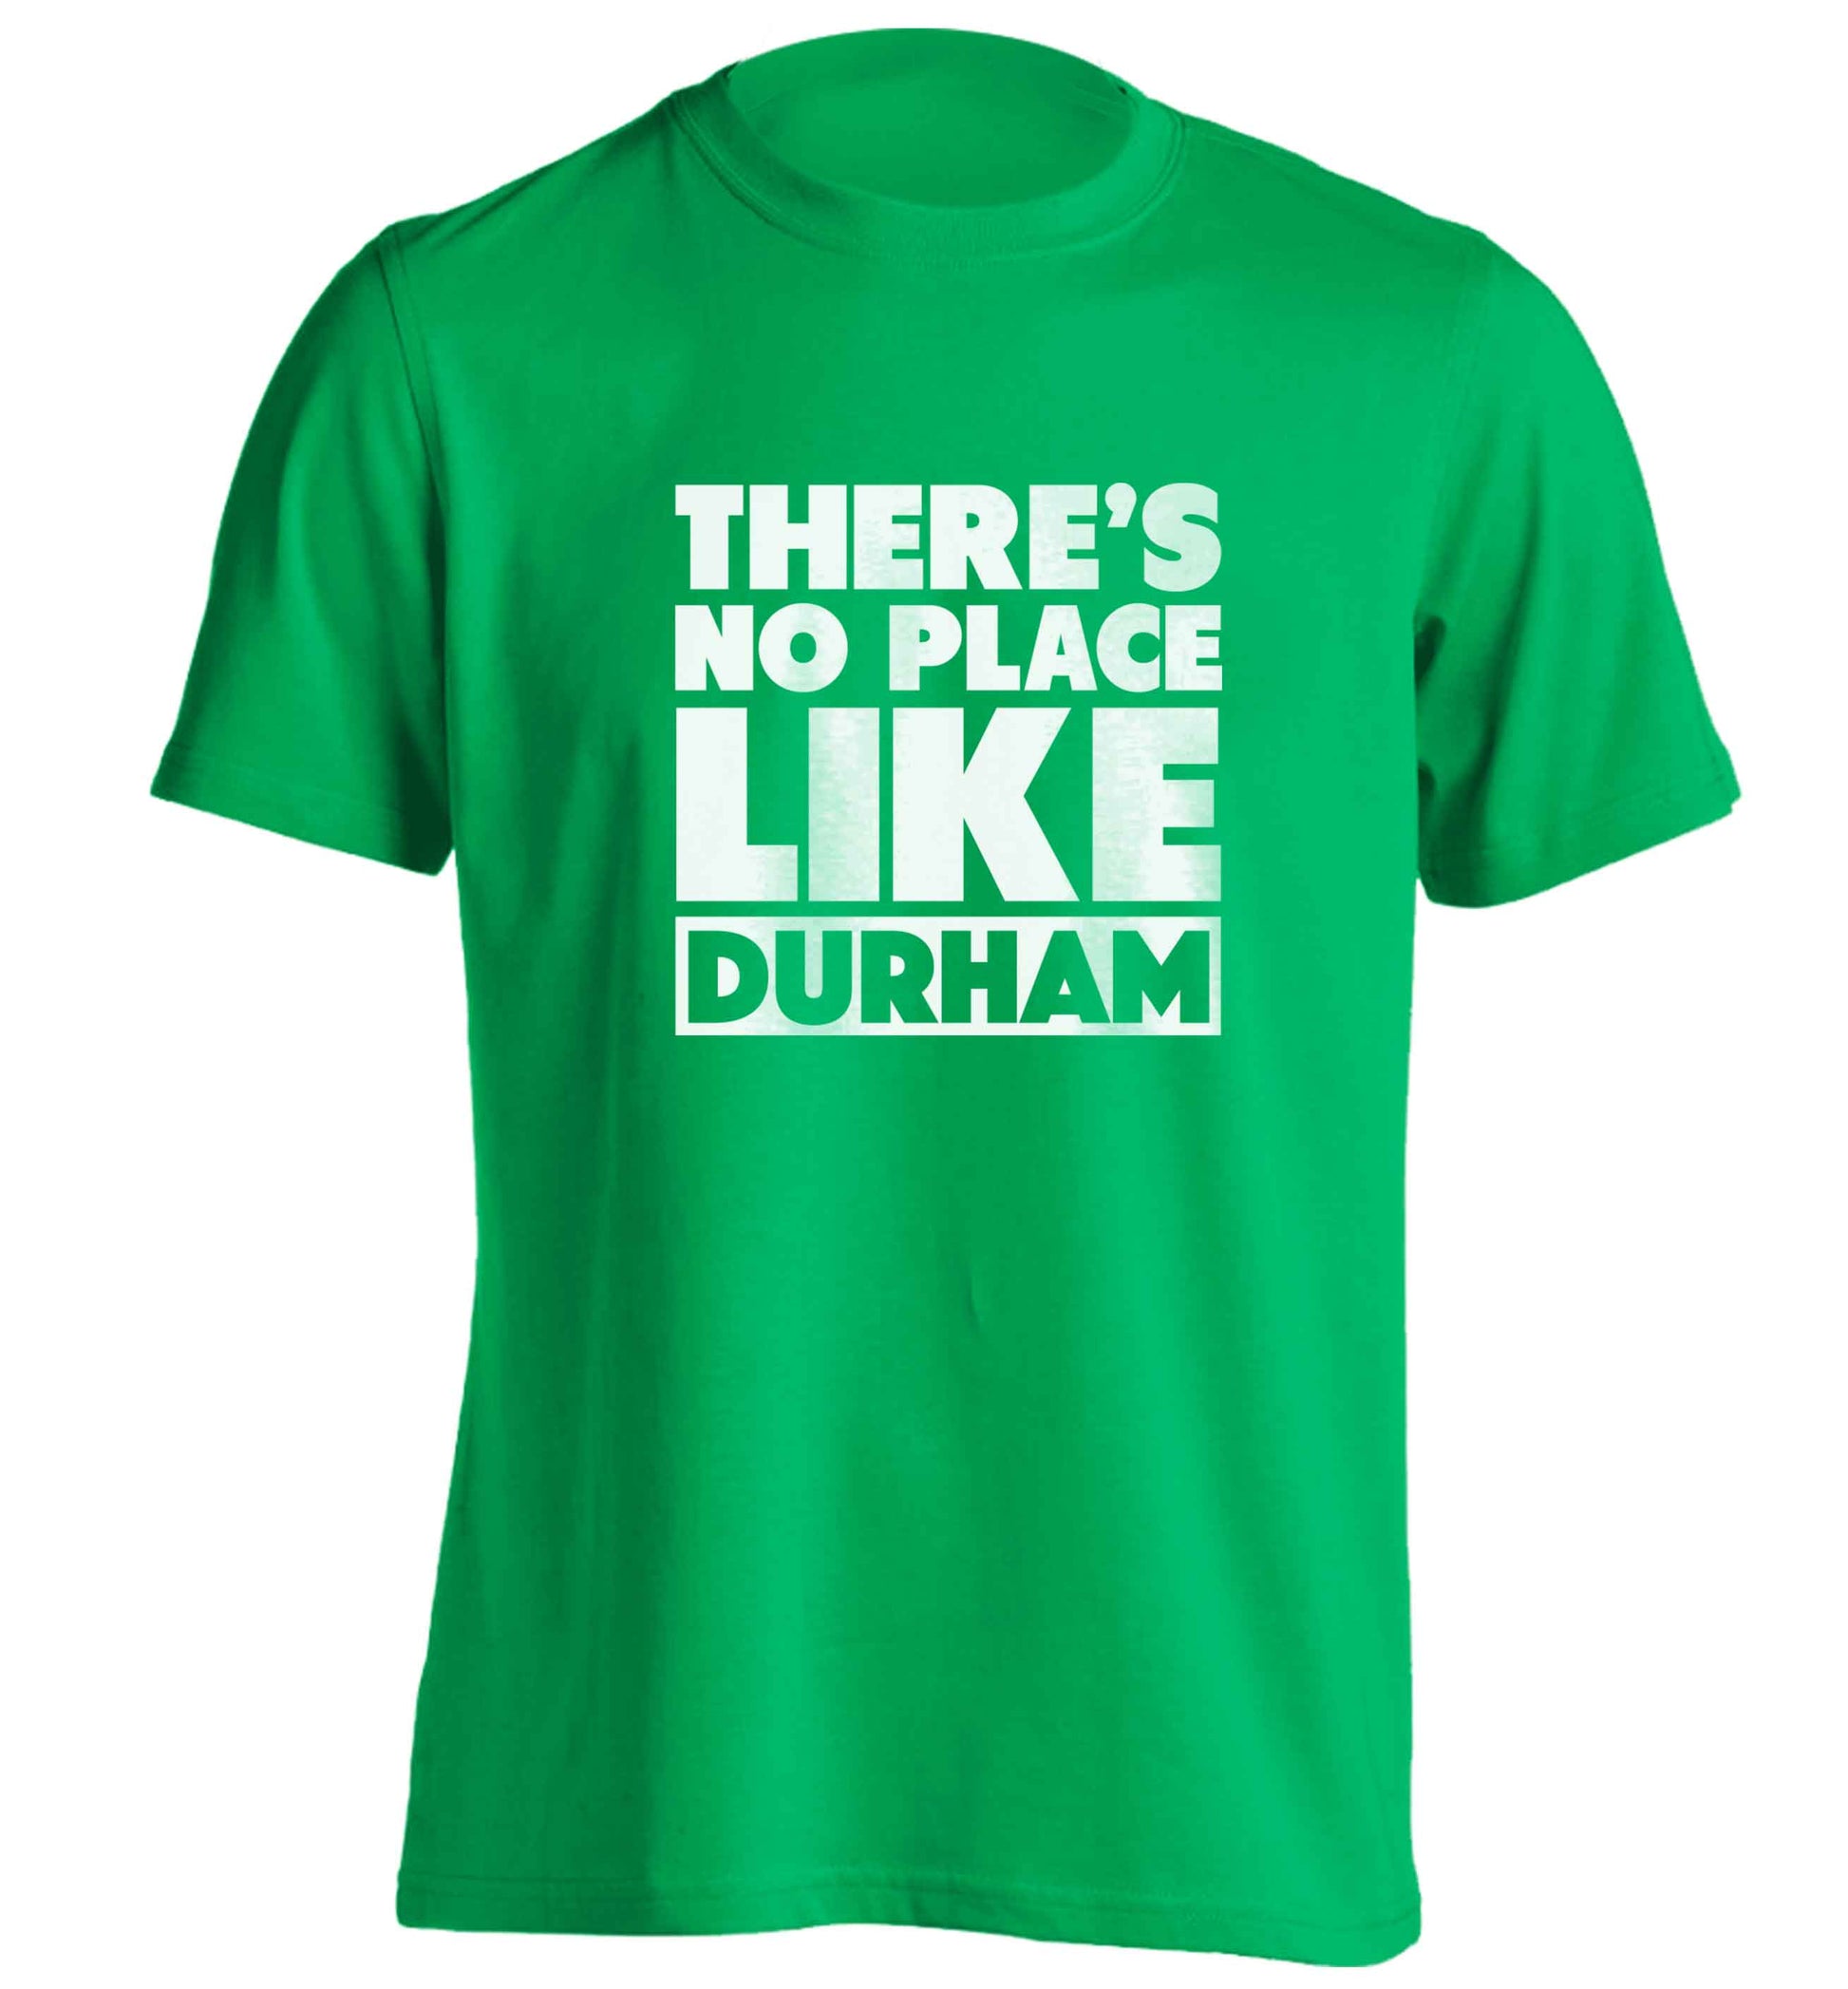 There's no place like Durham adults unisex green Tshirt 2XL